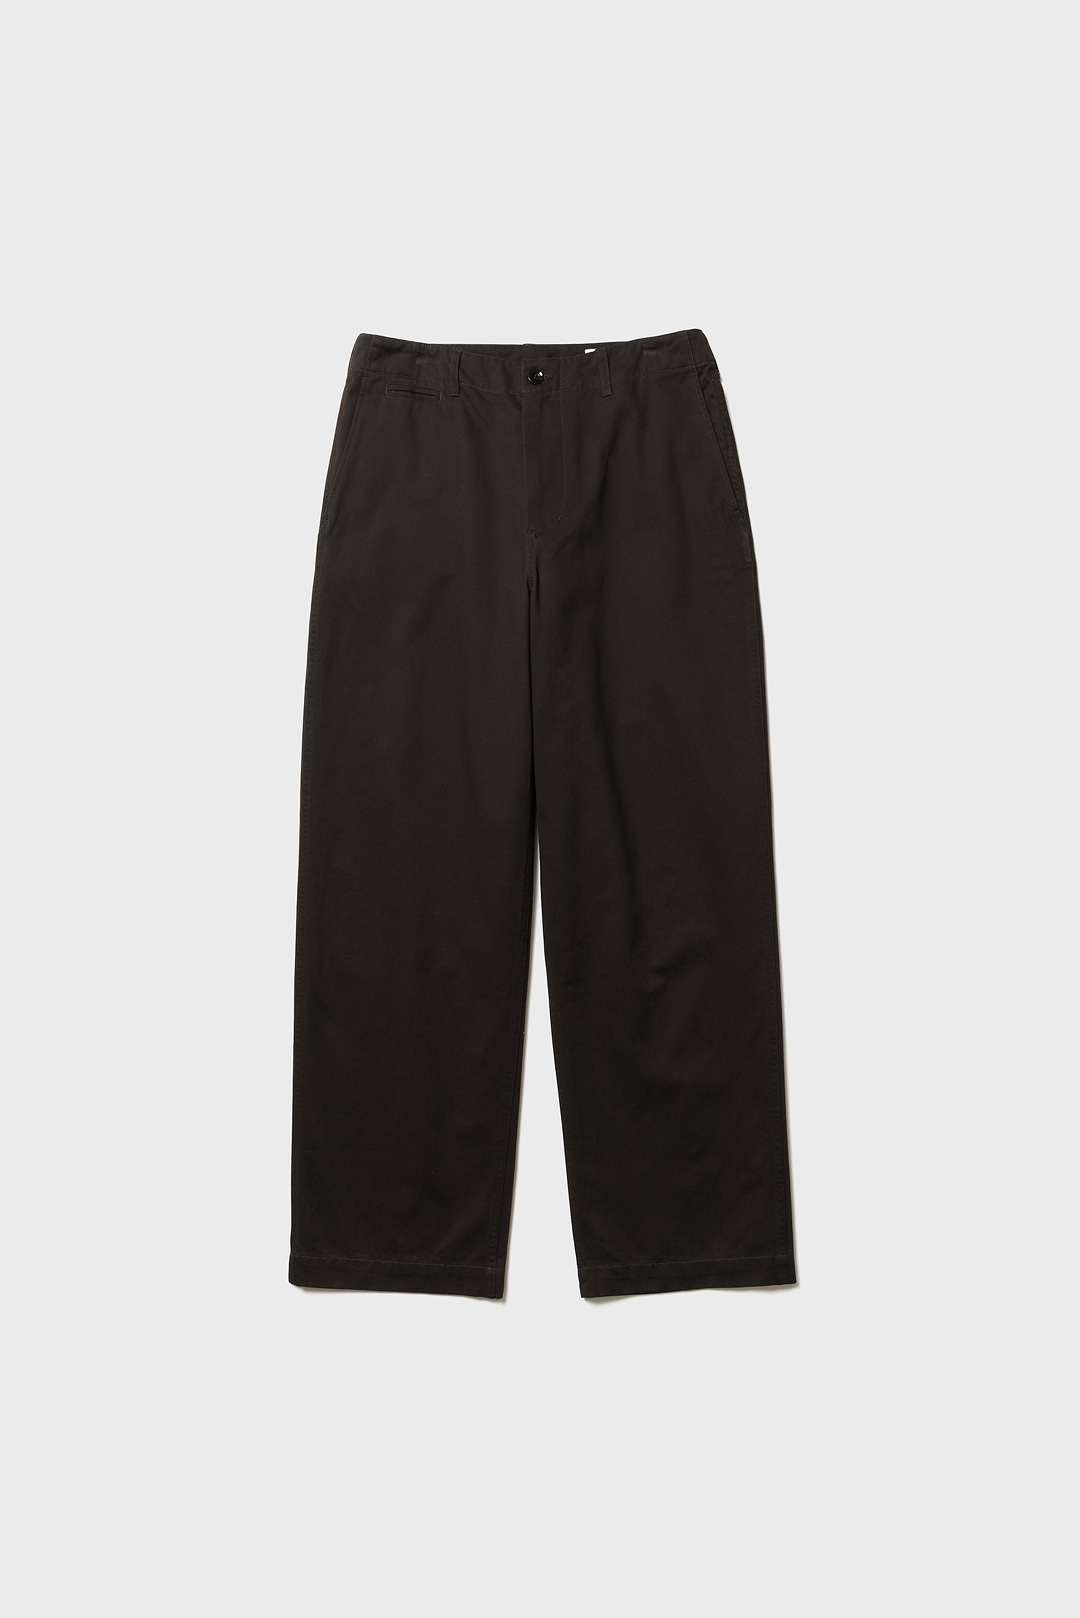 SOFT WASHED WIDE CHINO PANTS (DARK BROWN)